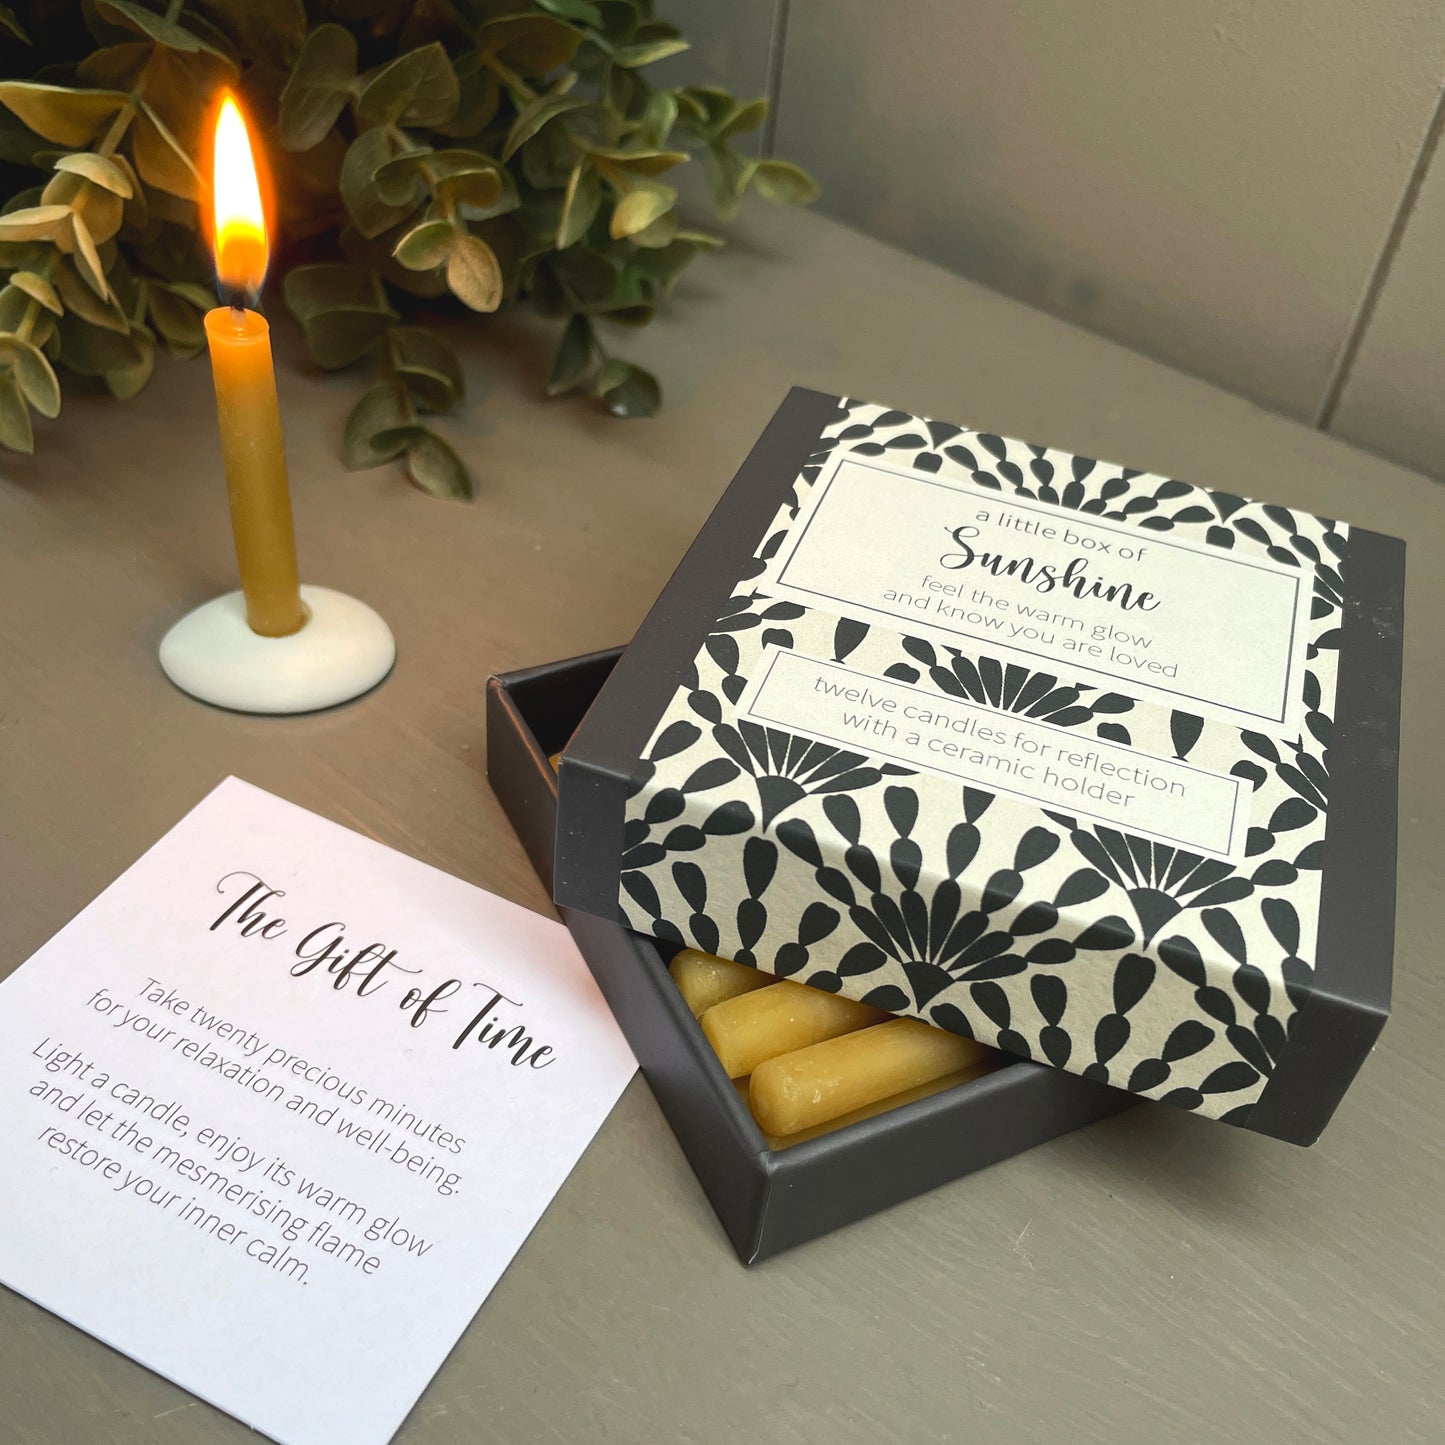 Cotton & Grey A Little Box Of Sunshine Candles Happy Flames Candle Gift Idea